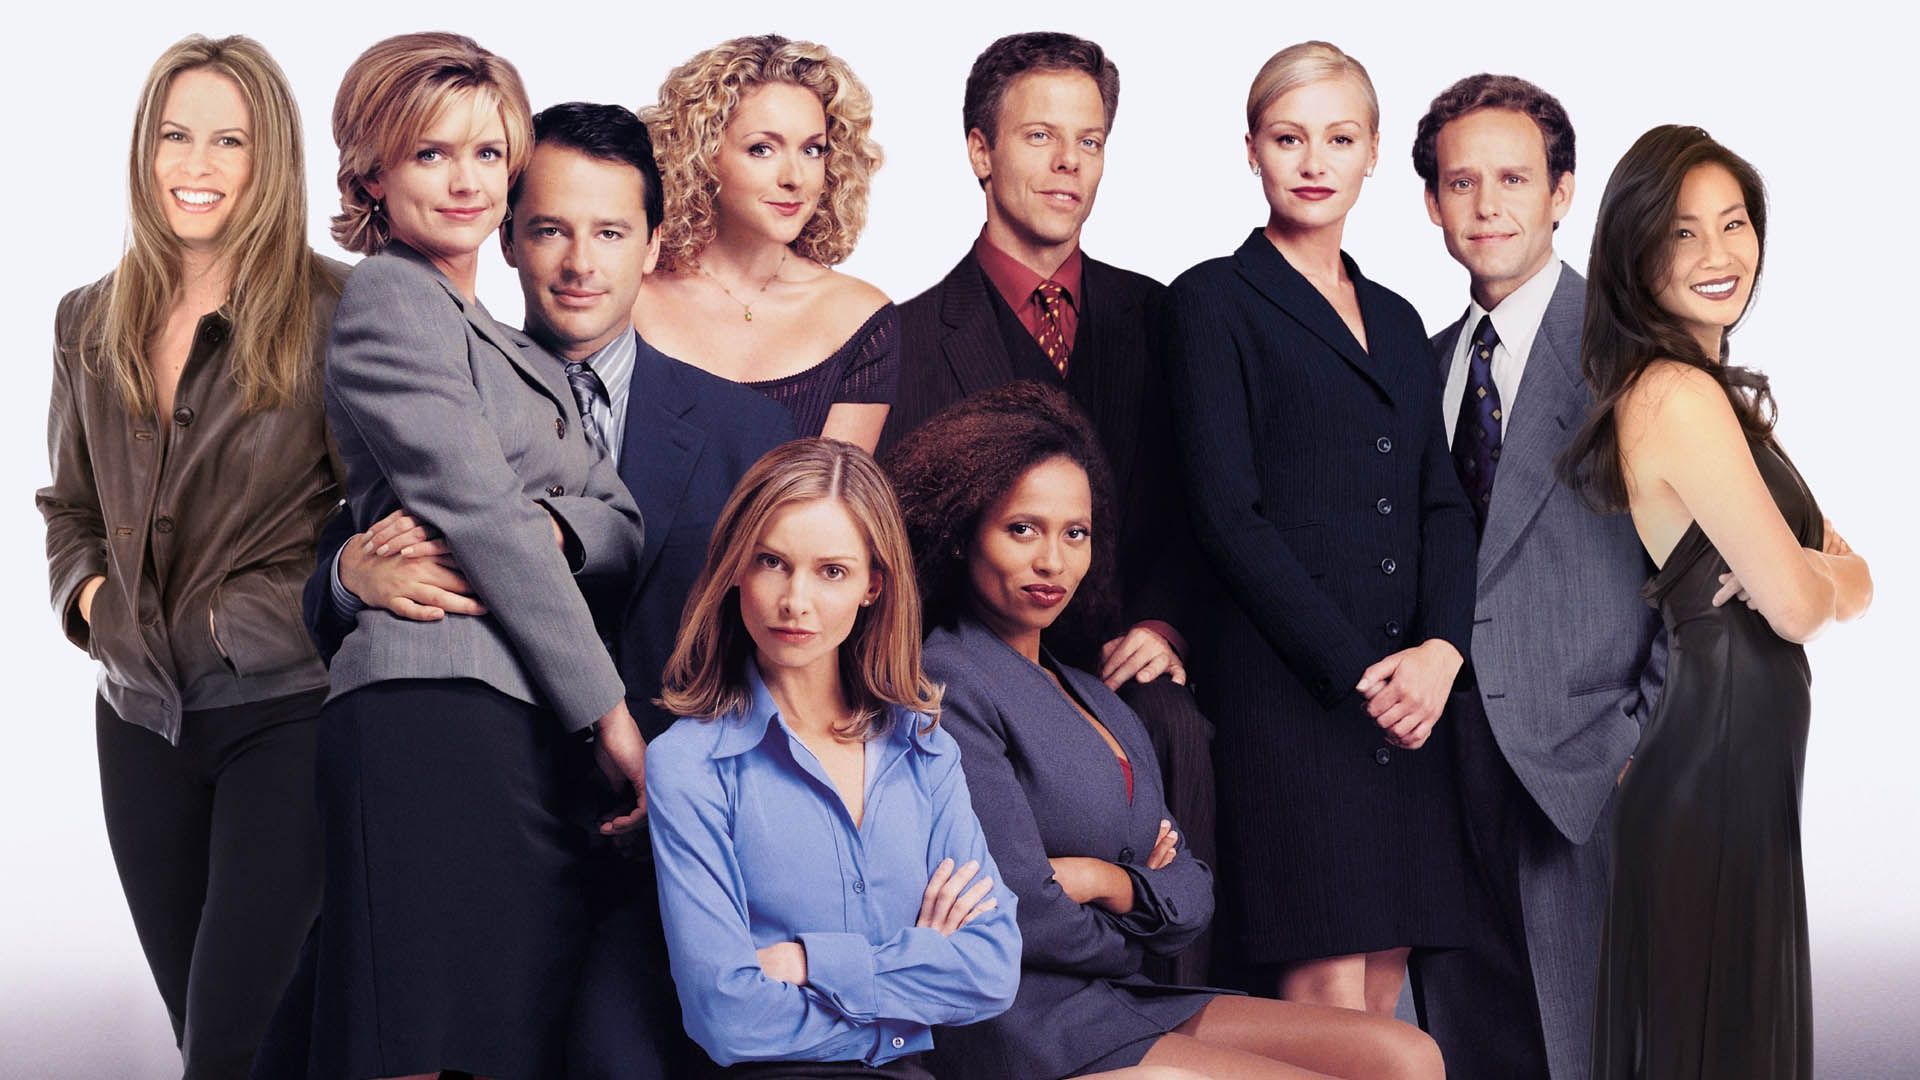 8 TV Shows That Are Guaranteed To Make You Want To Change Career – #7 Helped Me